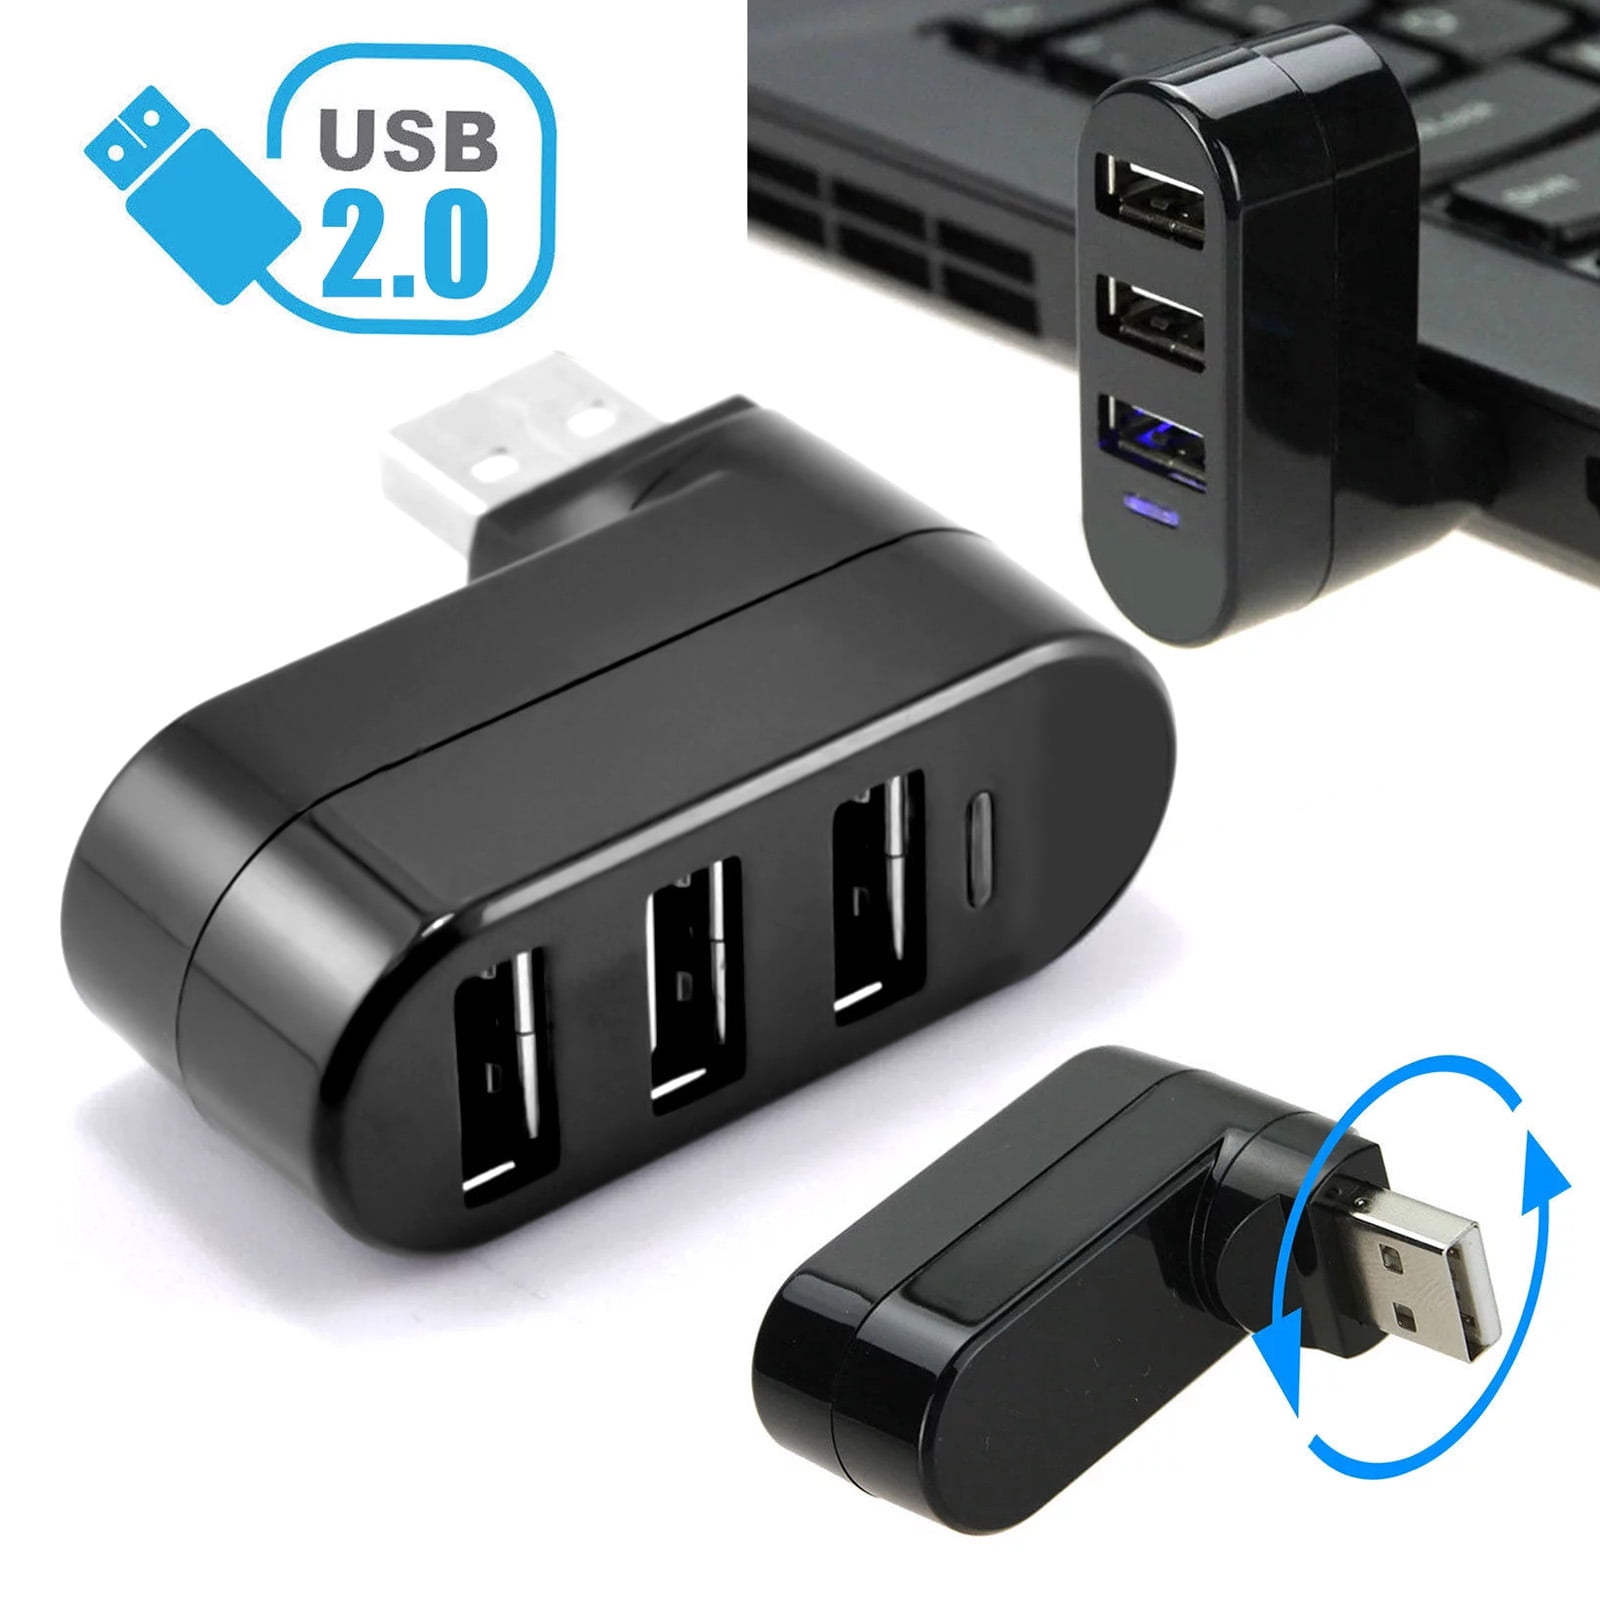 Aceele USB Hub 3.0 with Individual LED Power Switches & Type C Power Port,  Multiport USB Splitter 3.0 with 4FT Long Cable, Slim & Portable USB Port